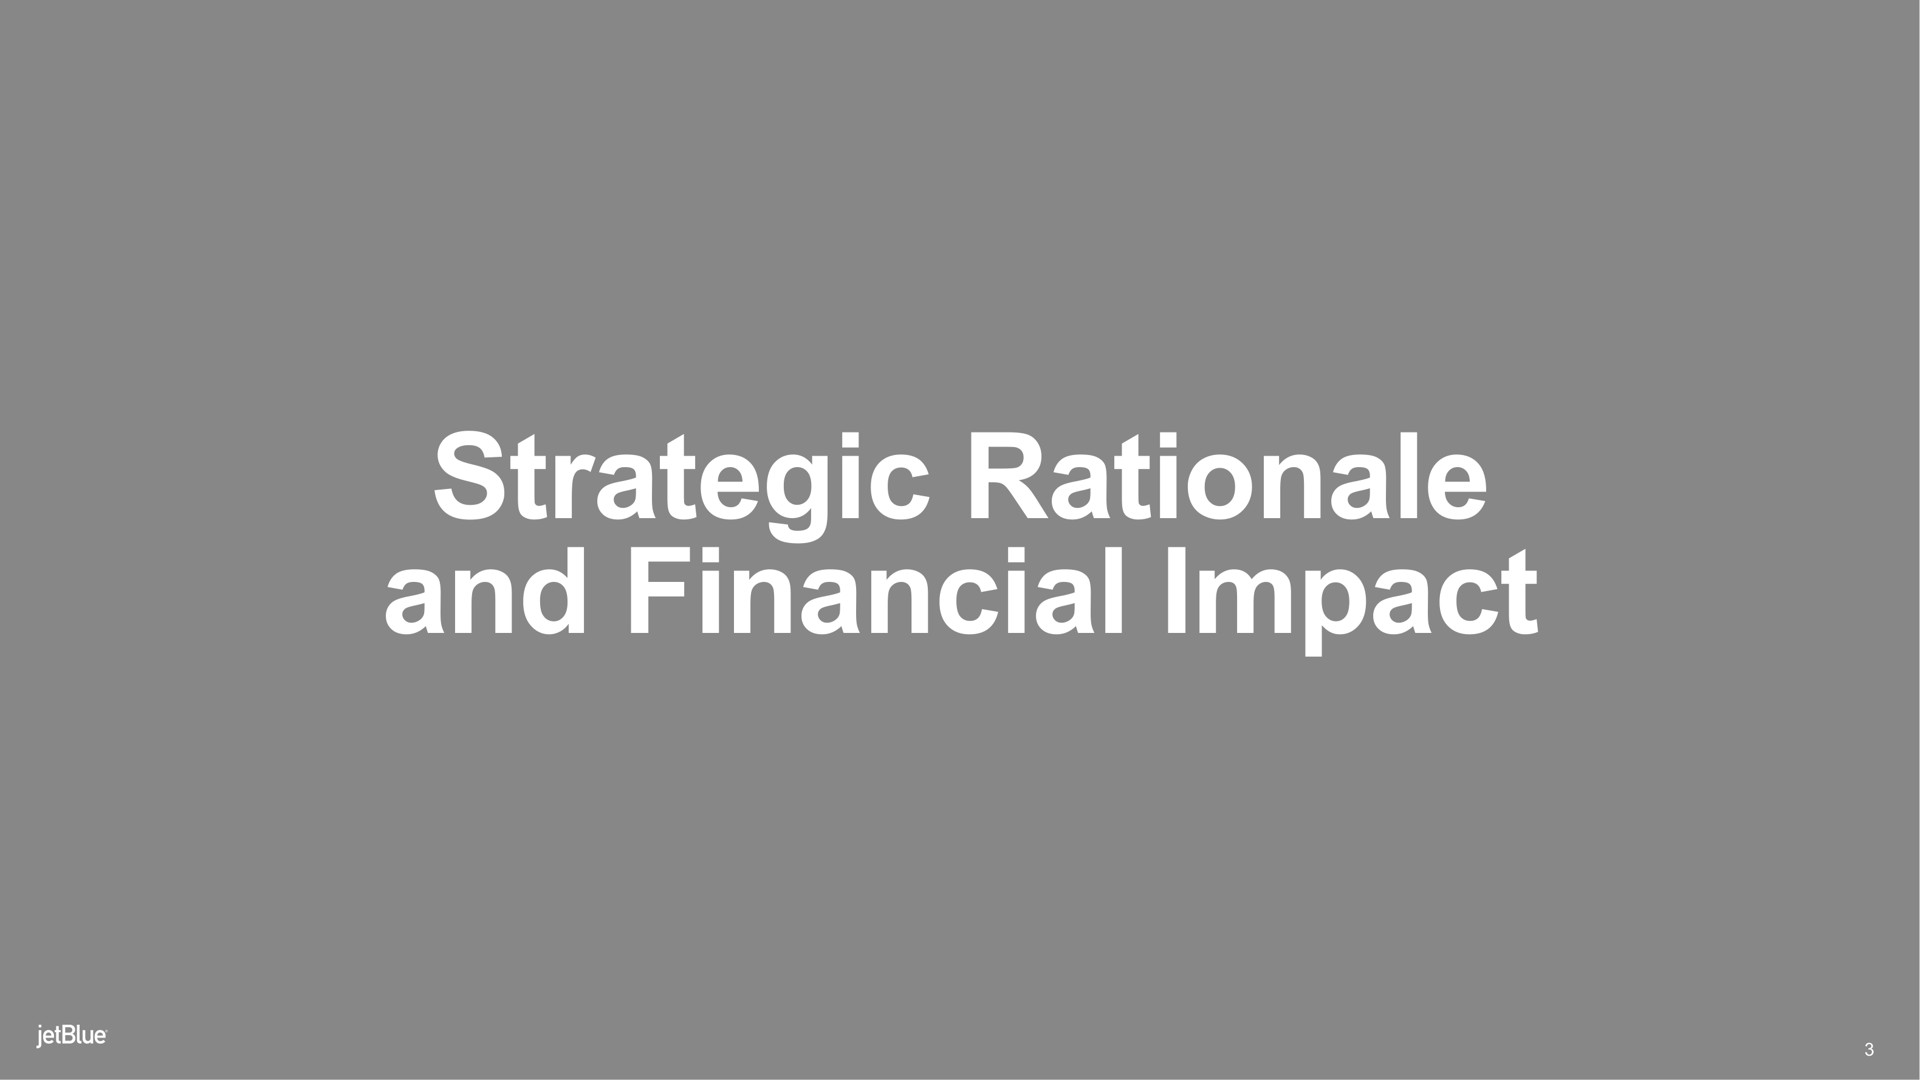 strategic rationale and financial impact | jetBlue